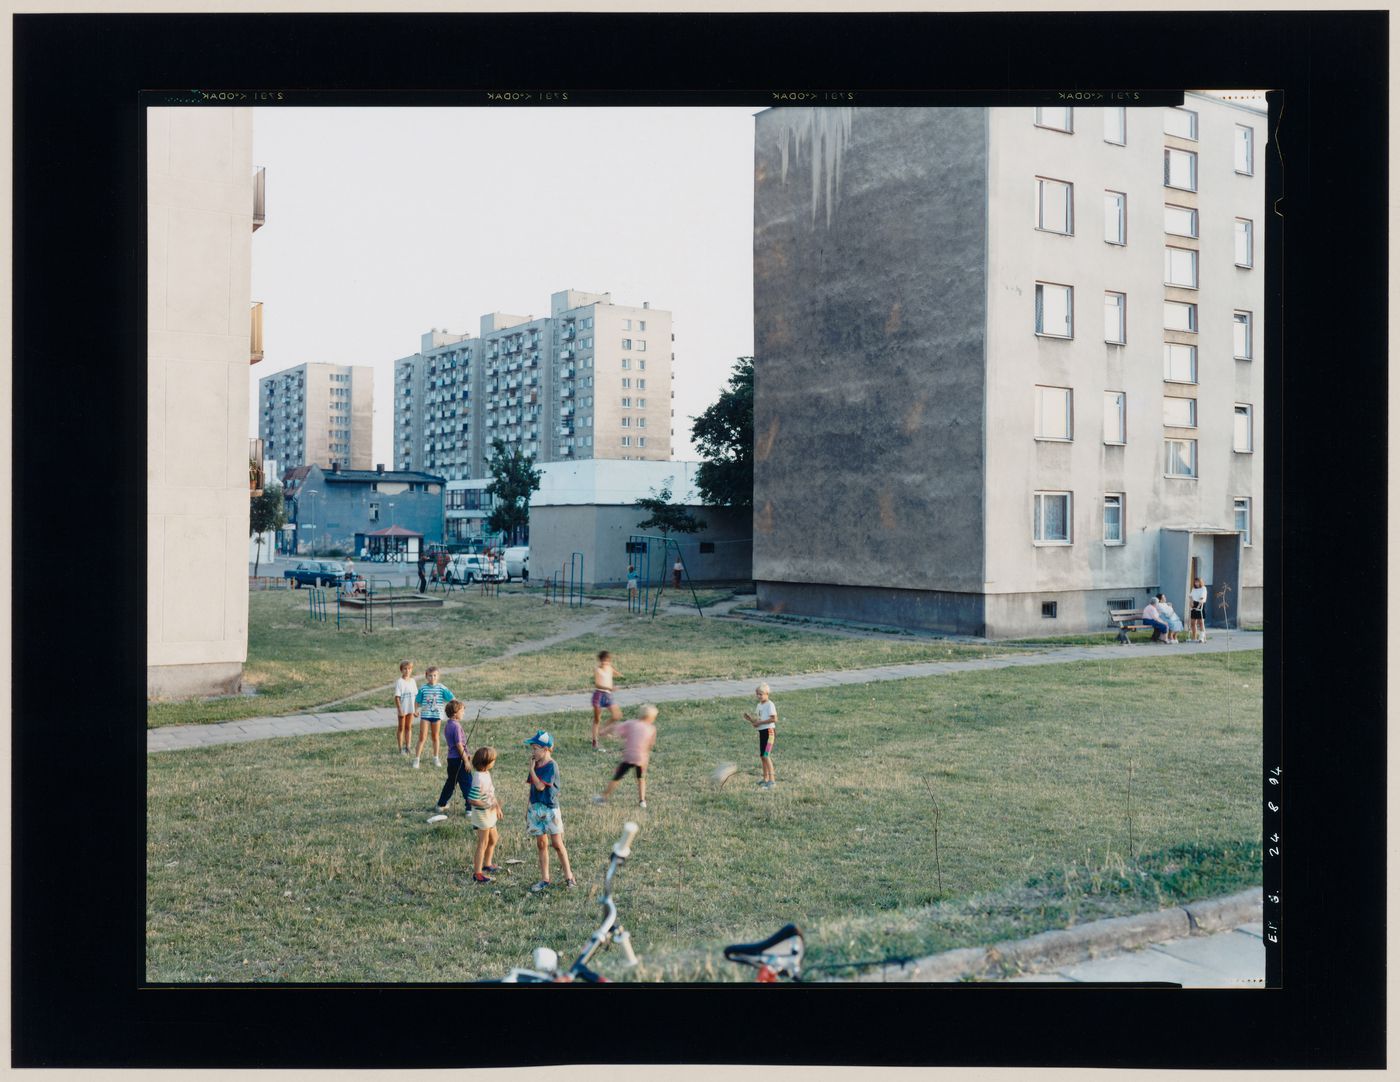 View of apartment houses and children playing on a lawn showing a playground in the background, Malbork, Poland (from the series "In between cities")